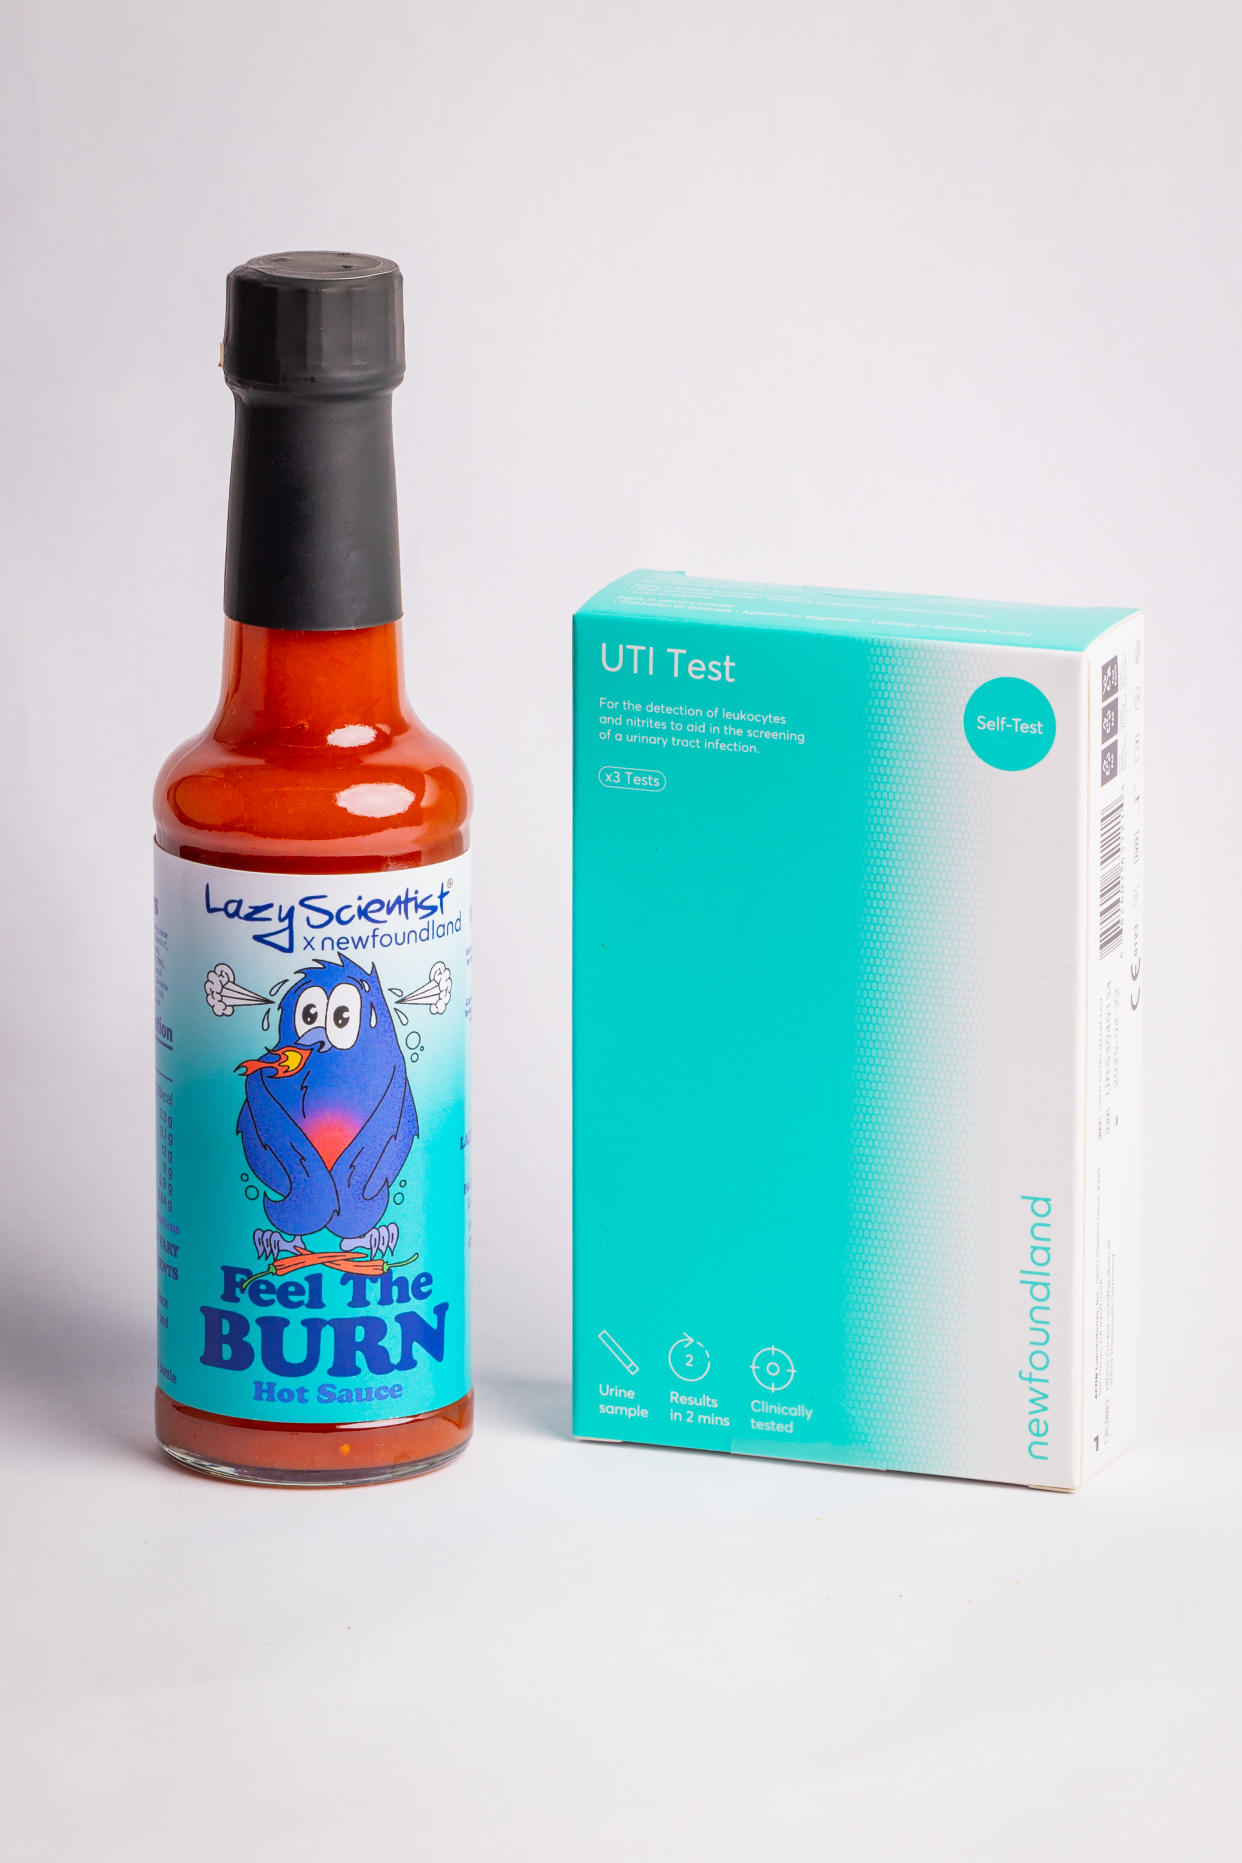 Newfoundland Diagnostics has partnered with sauce creator Lazy Scientist to create a hot sauce that aims to help people who have never experienced a UTI before understand the pain it causes. (Newfoundland Diagnostics)